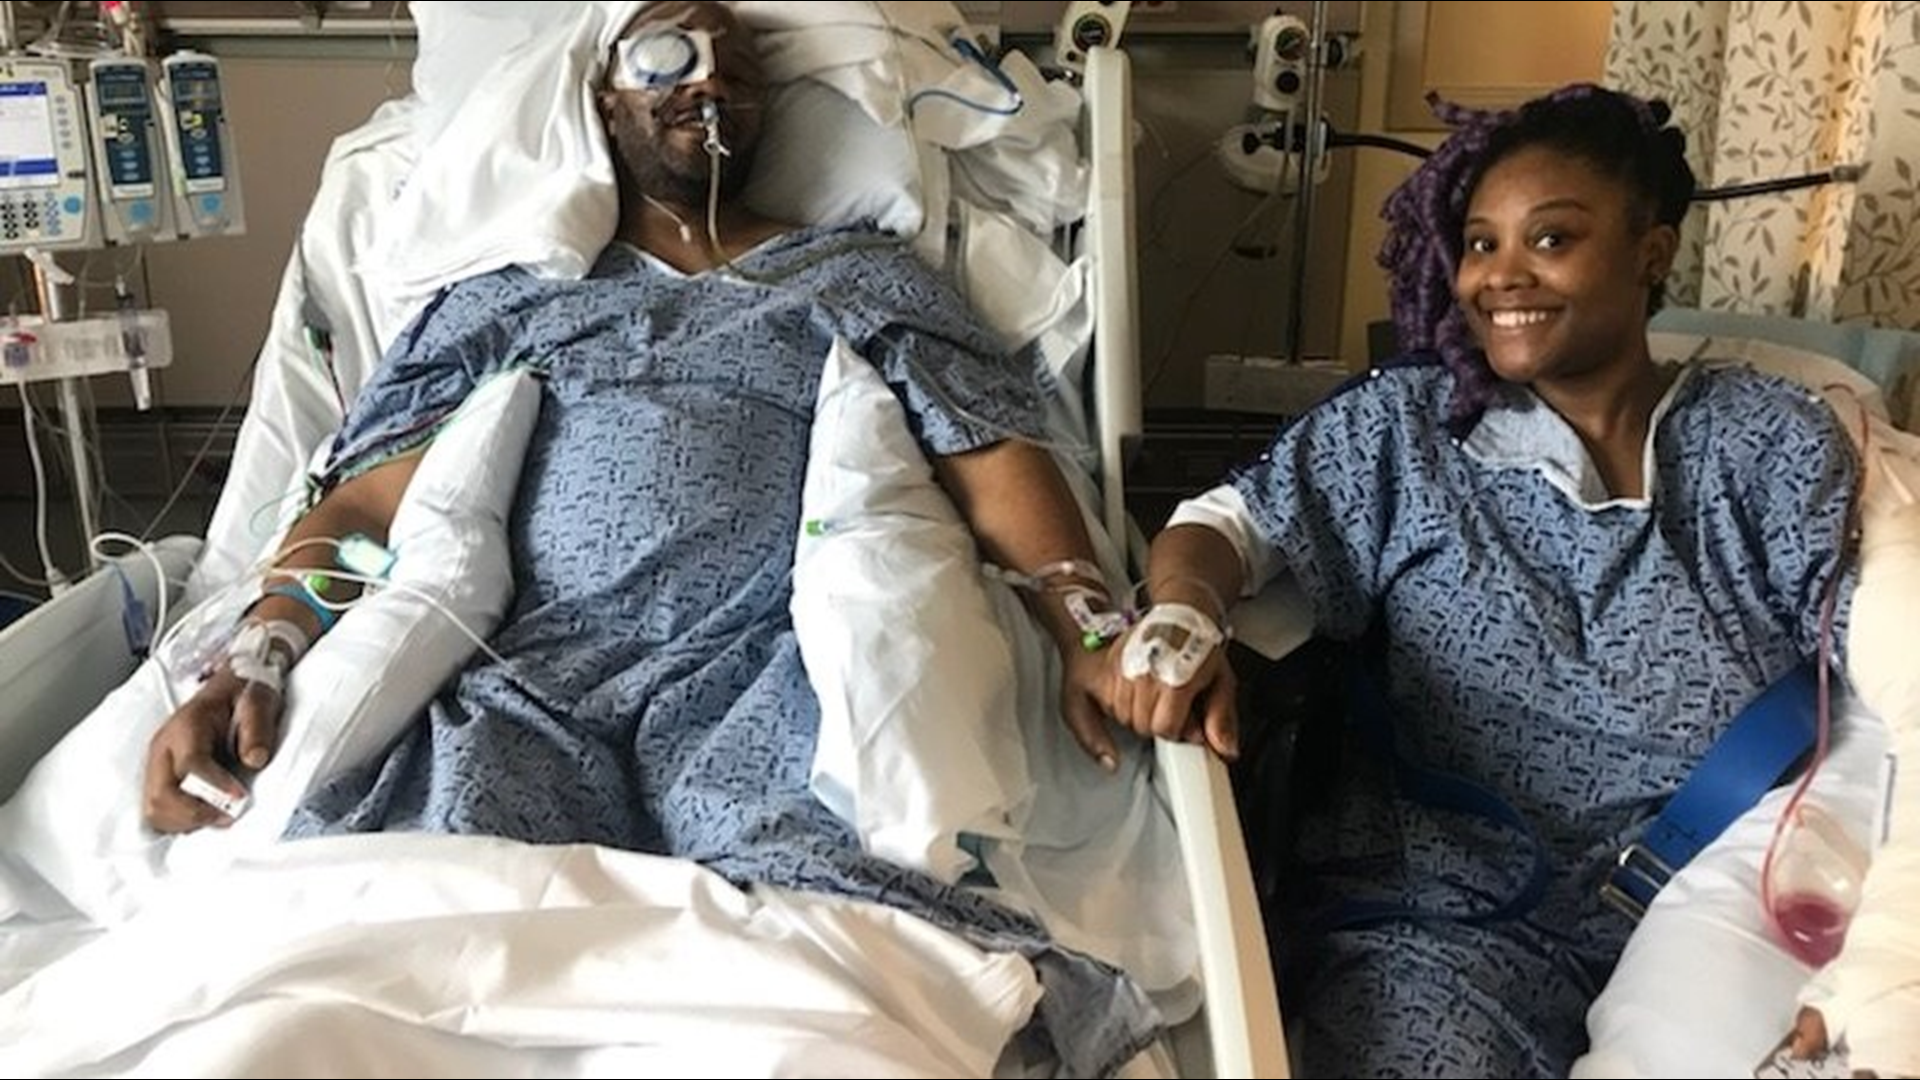 They were each shot seven times but both survived. Now they are working to recover from the physical and emotional pain that came when their own family member opened fire.